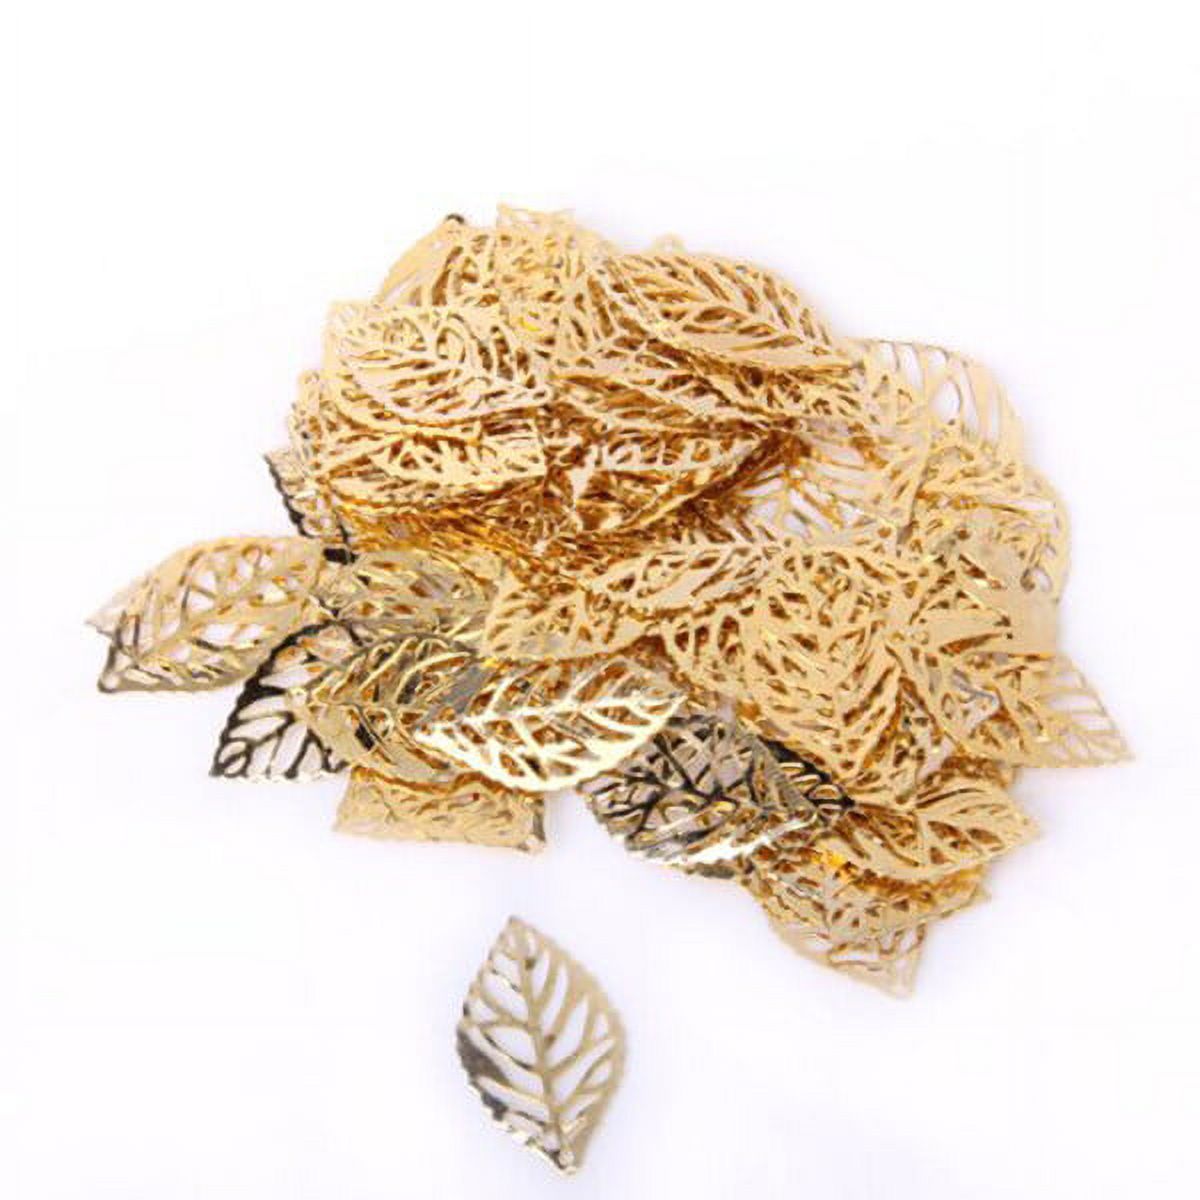 Leaf Tree Charms Jewelry Making Gold Leaves Metal Fall Crafts Embellishments Hollow Pierced Diy Alloy Decor Charm - image 1 of 5